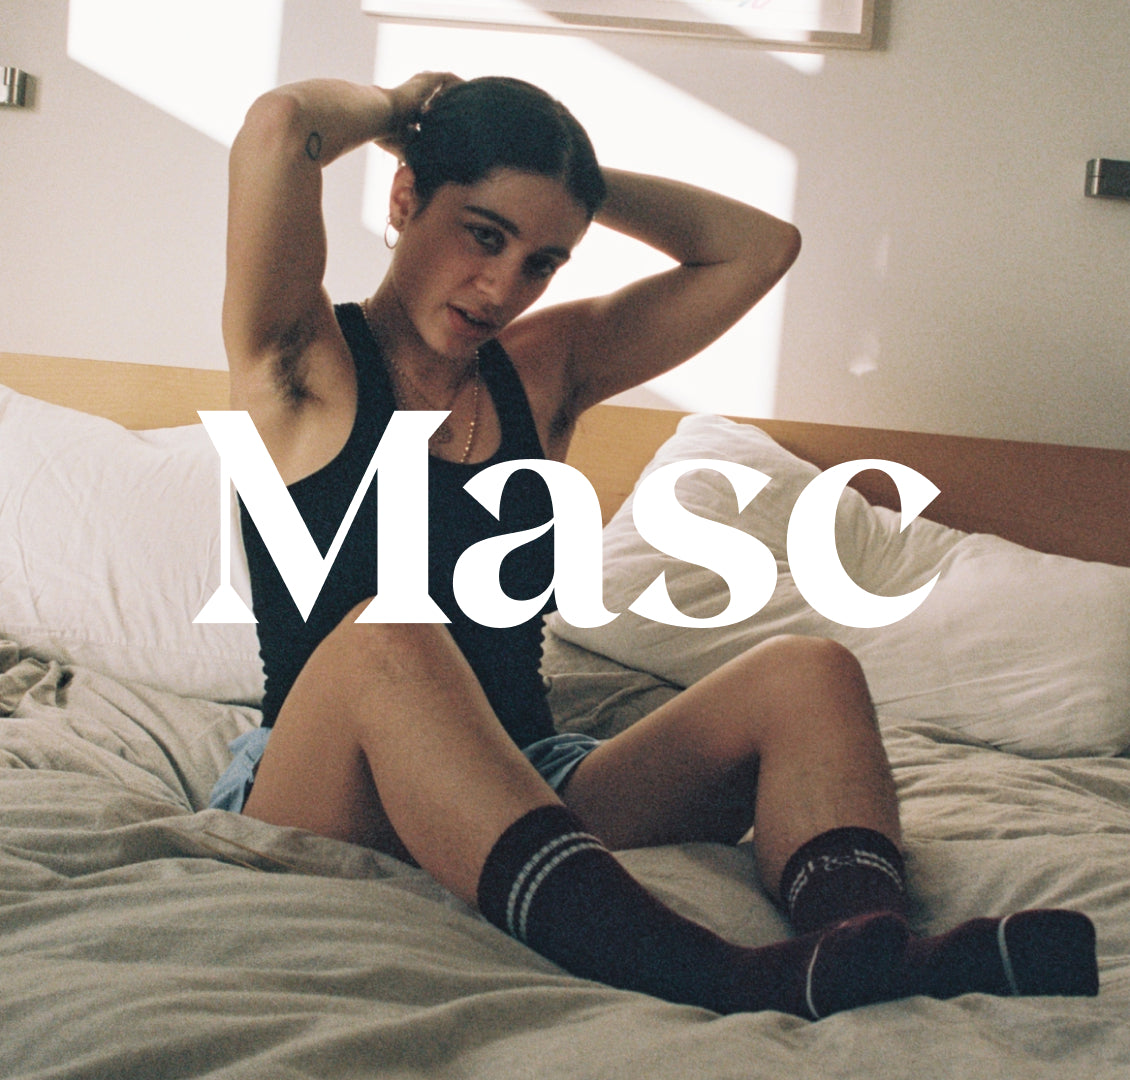 'Masc' text over photo of woman wearing black tank, sleep shorts and socks, tying their hair back in bed